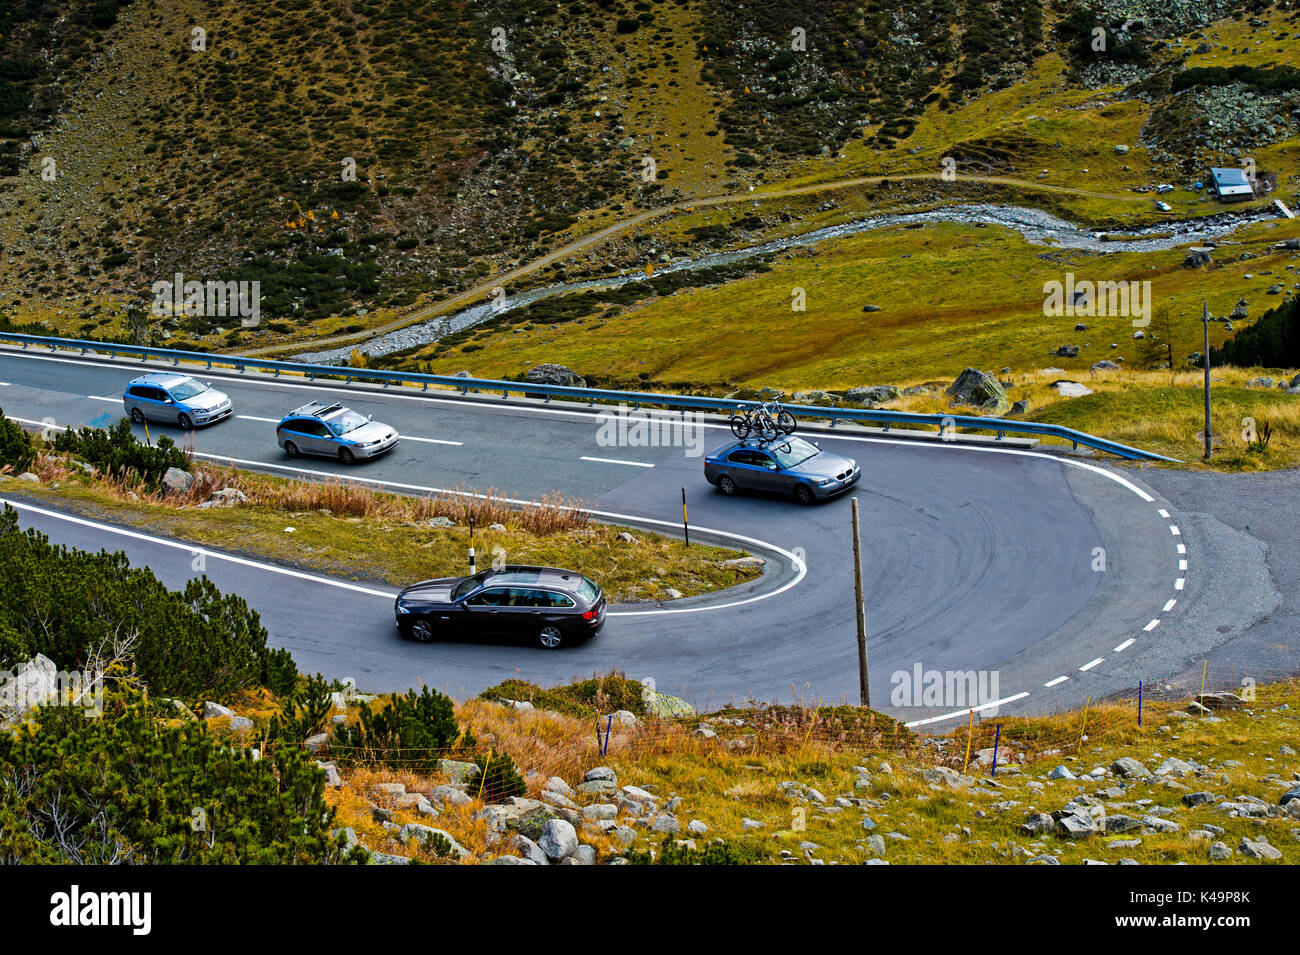 Cars On A Pass Road In A Hairpin Turn On The Flüela Pass Road, Davos, Graubunden, Switzerland Stock Photo